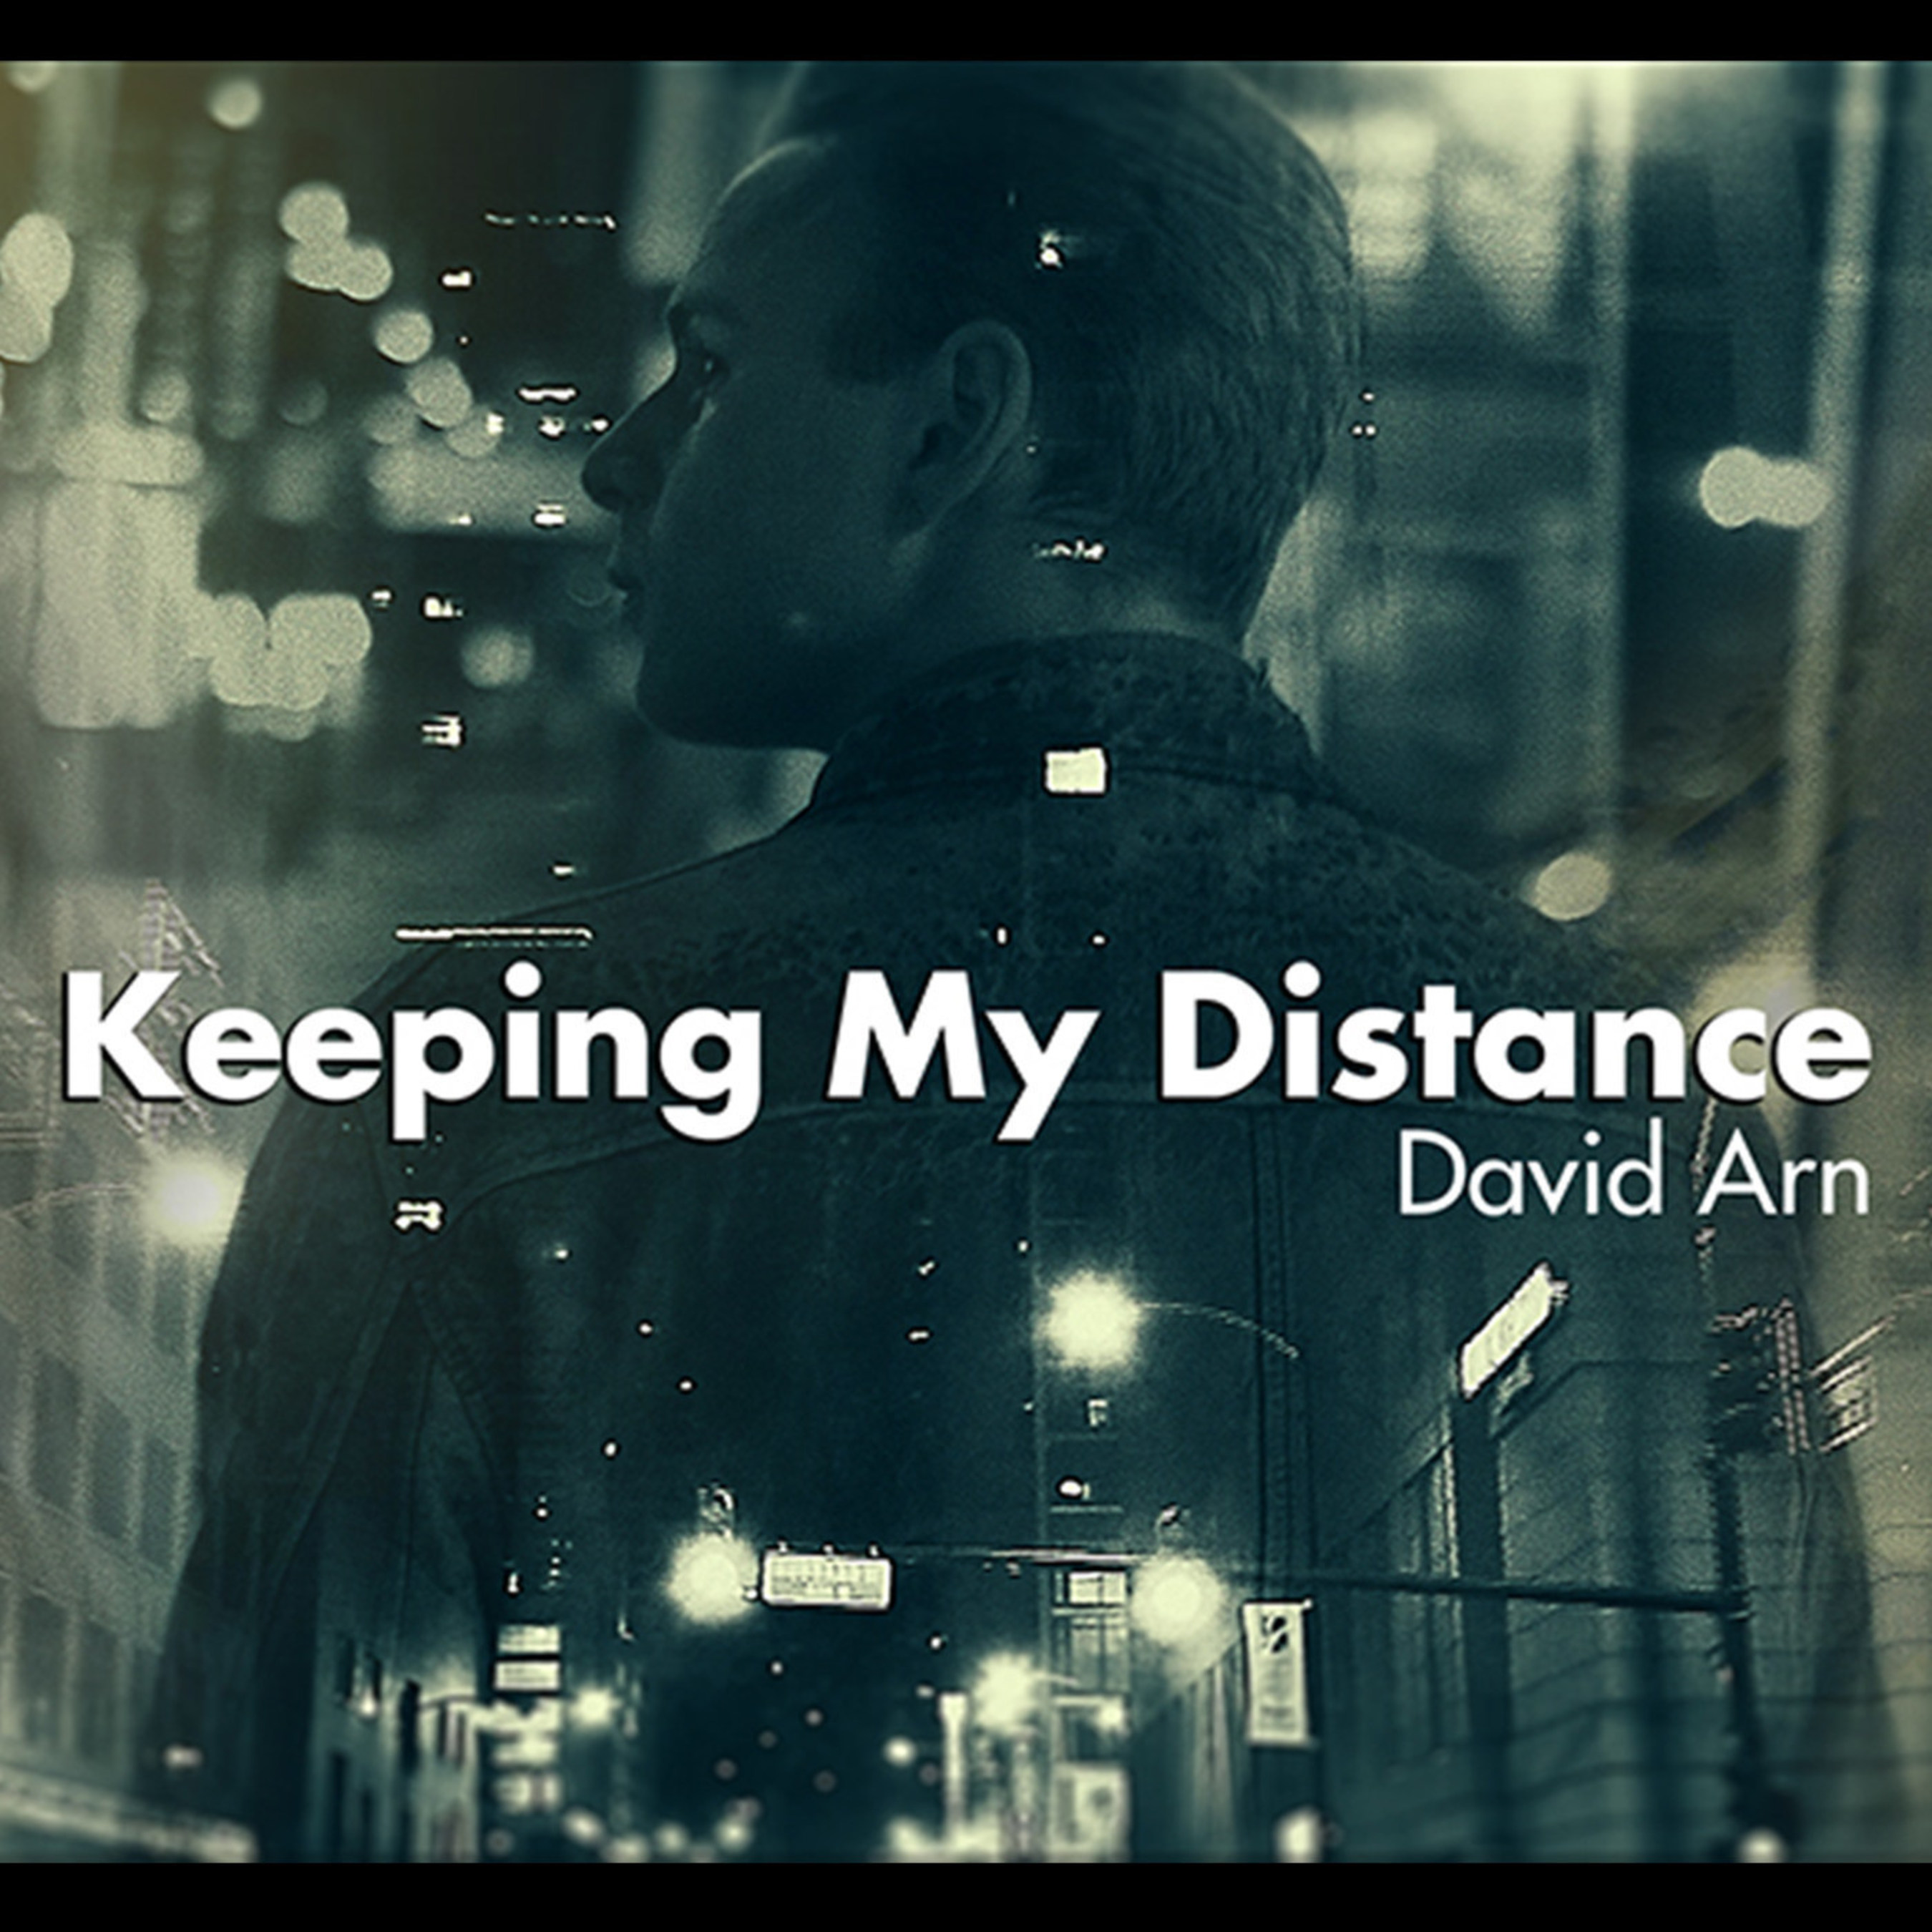 David Arn's "Keeping My Distance" Comes Closer to Music Fans With New Video by Montreal's Playmaker Studios